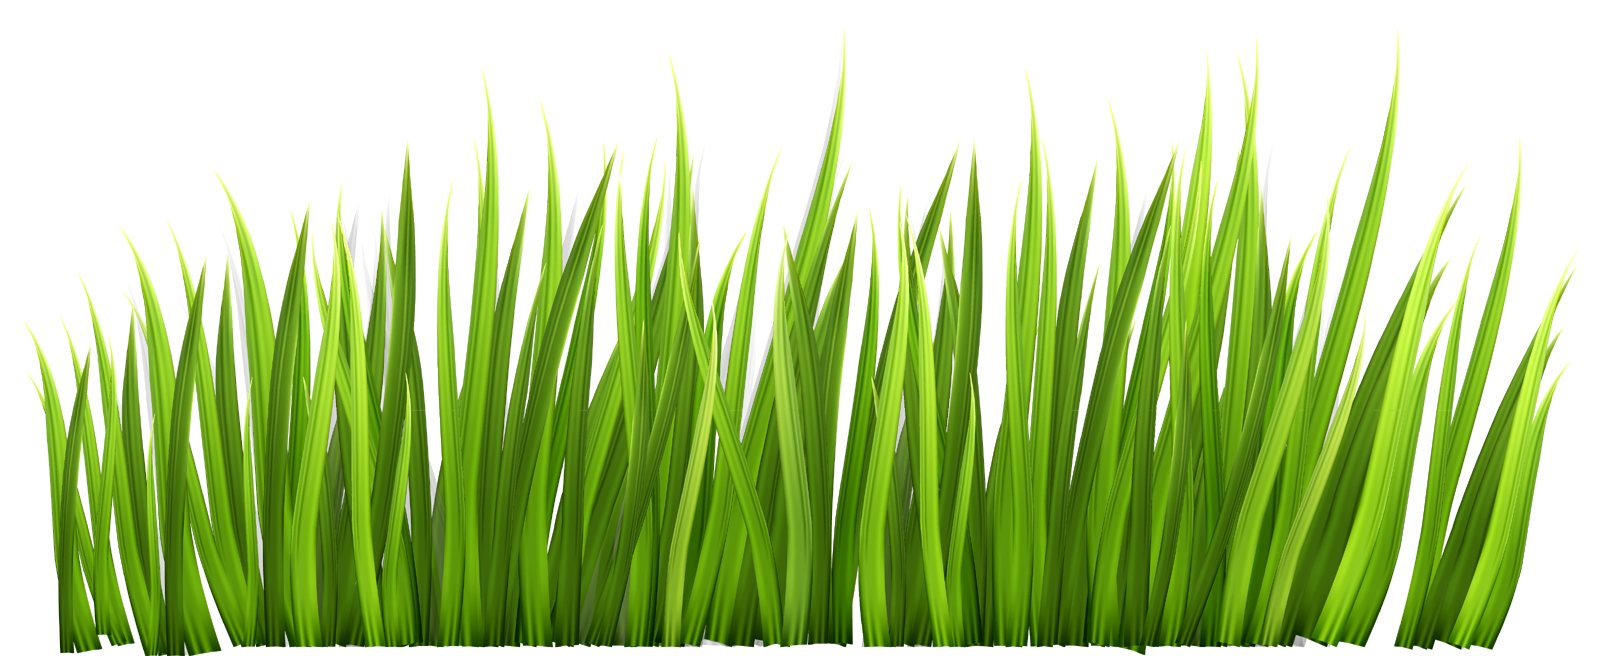 Grass Background Clipart | Free download on ClipArtMag